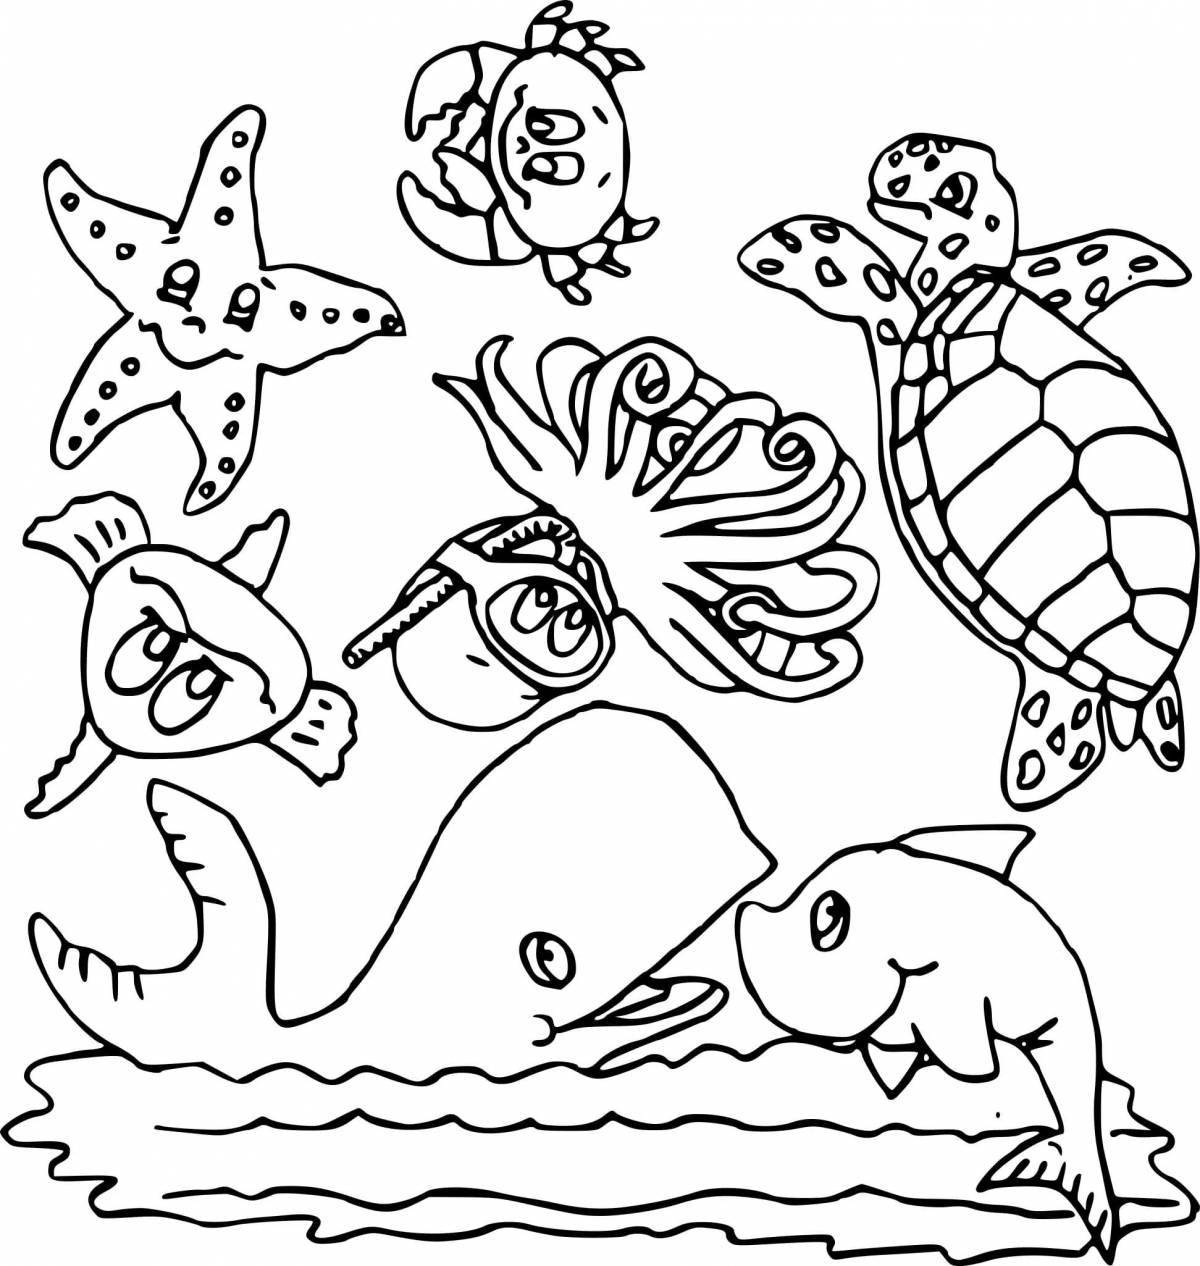 Amazing marine life coloring page for 3-4 year olds